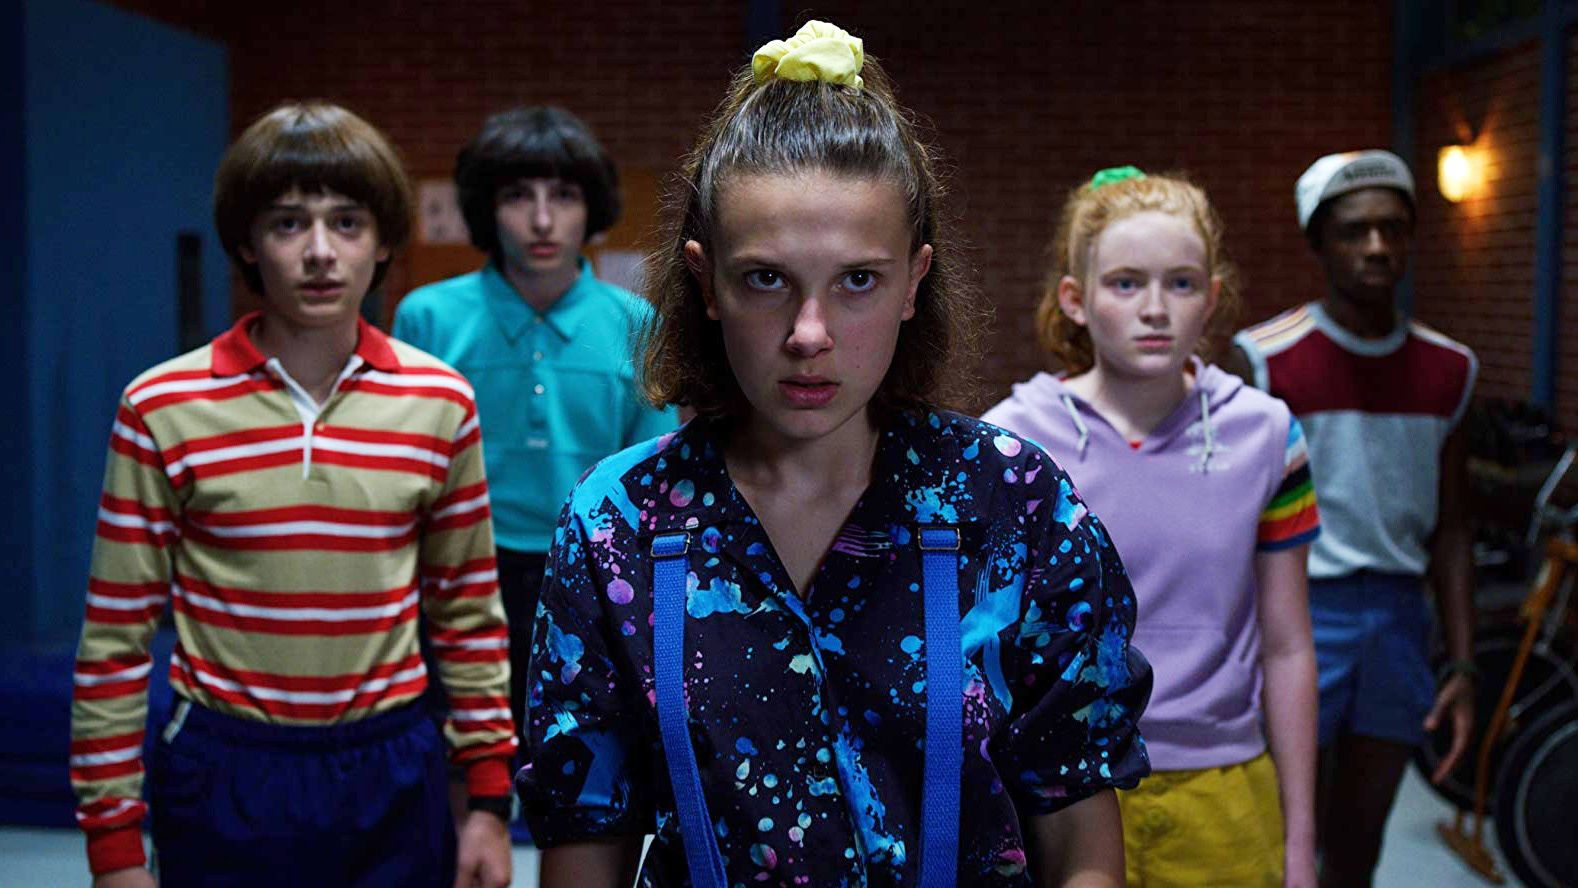 'Stranger Things' had record viewership in first four days